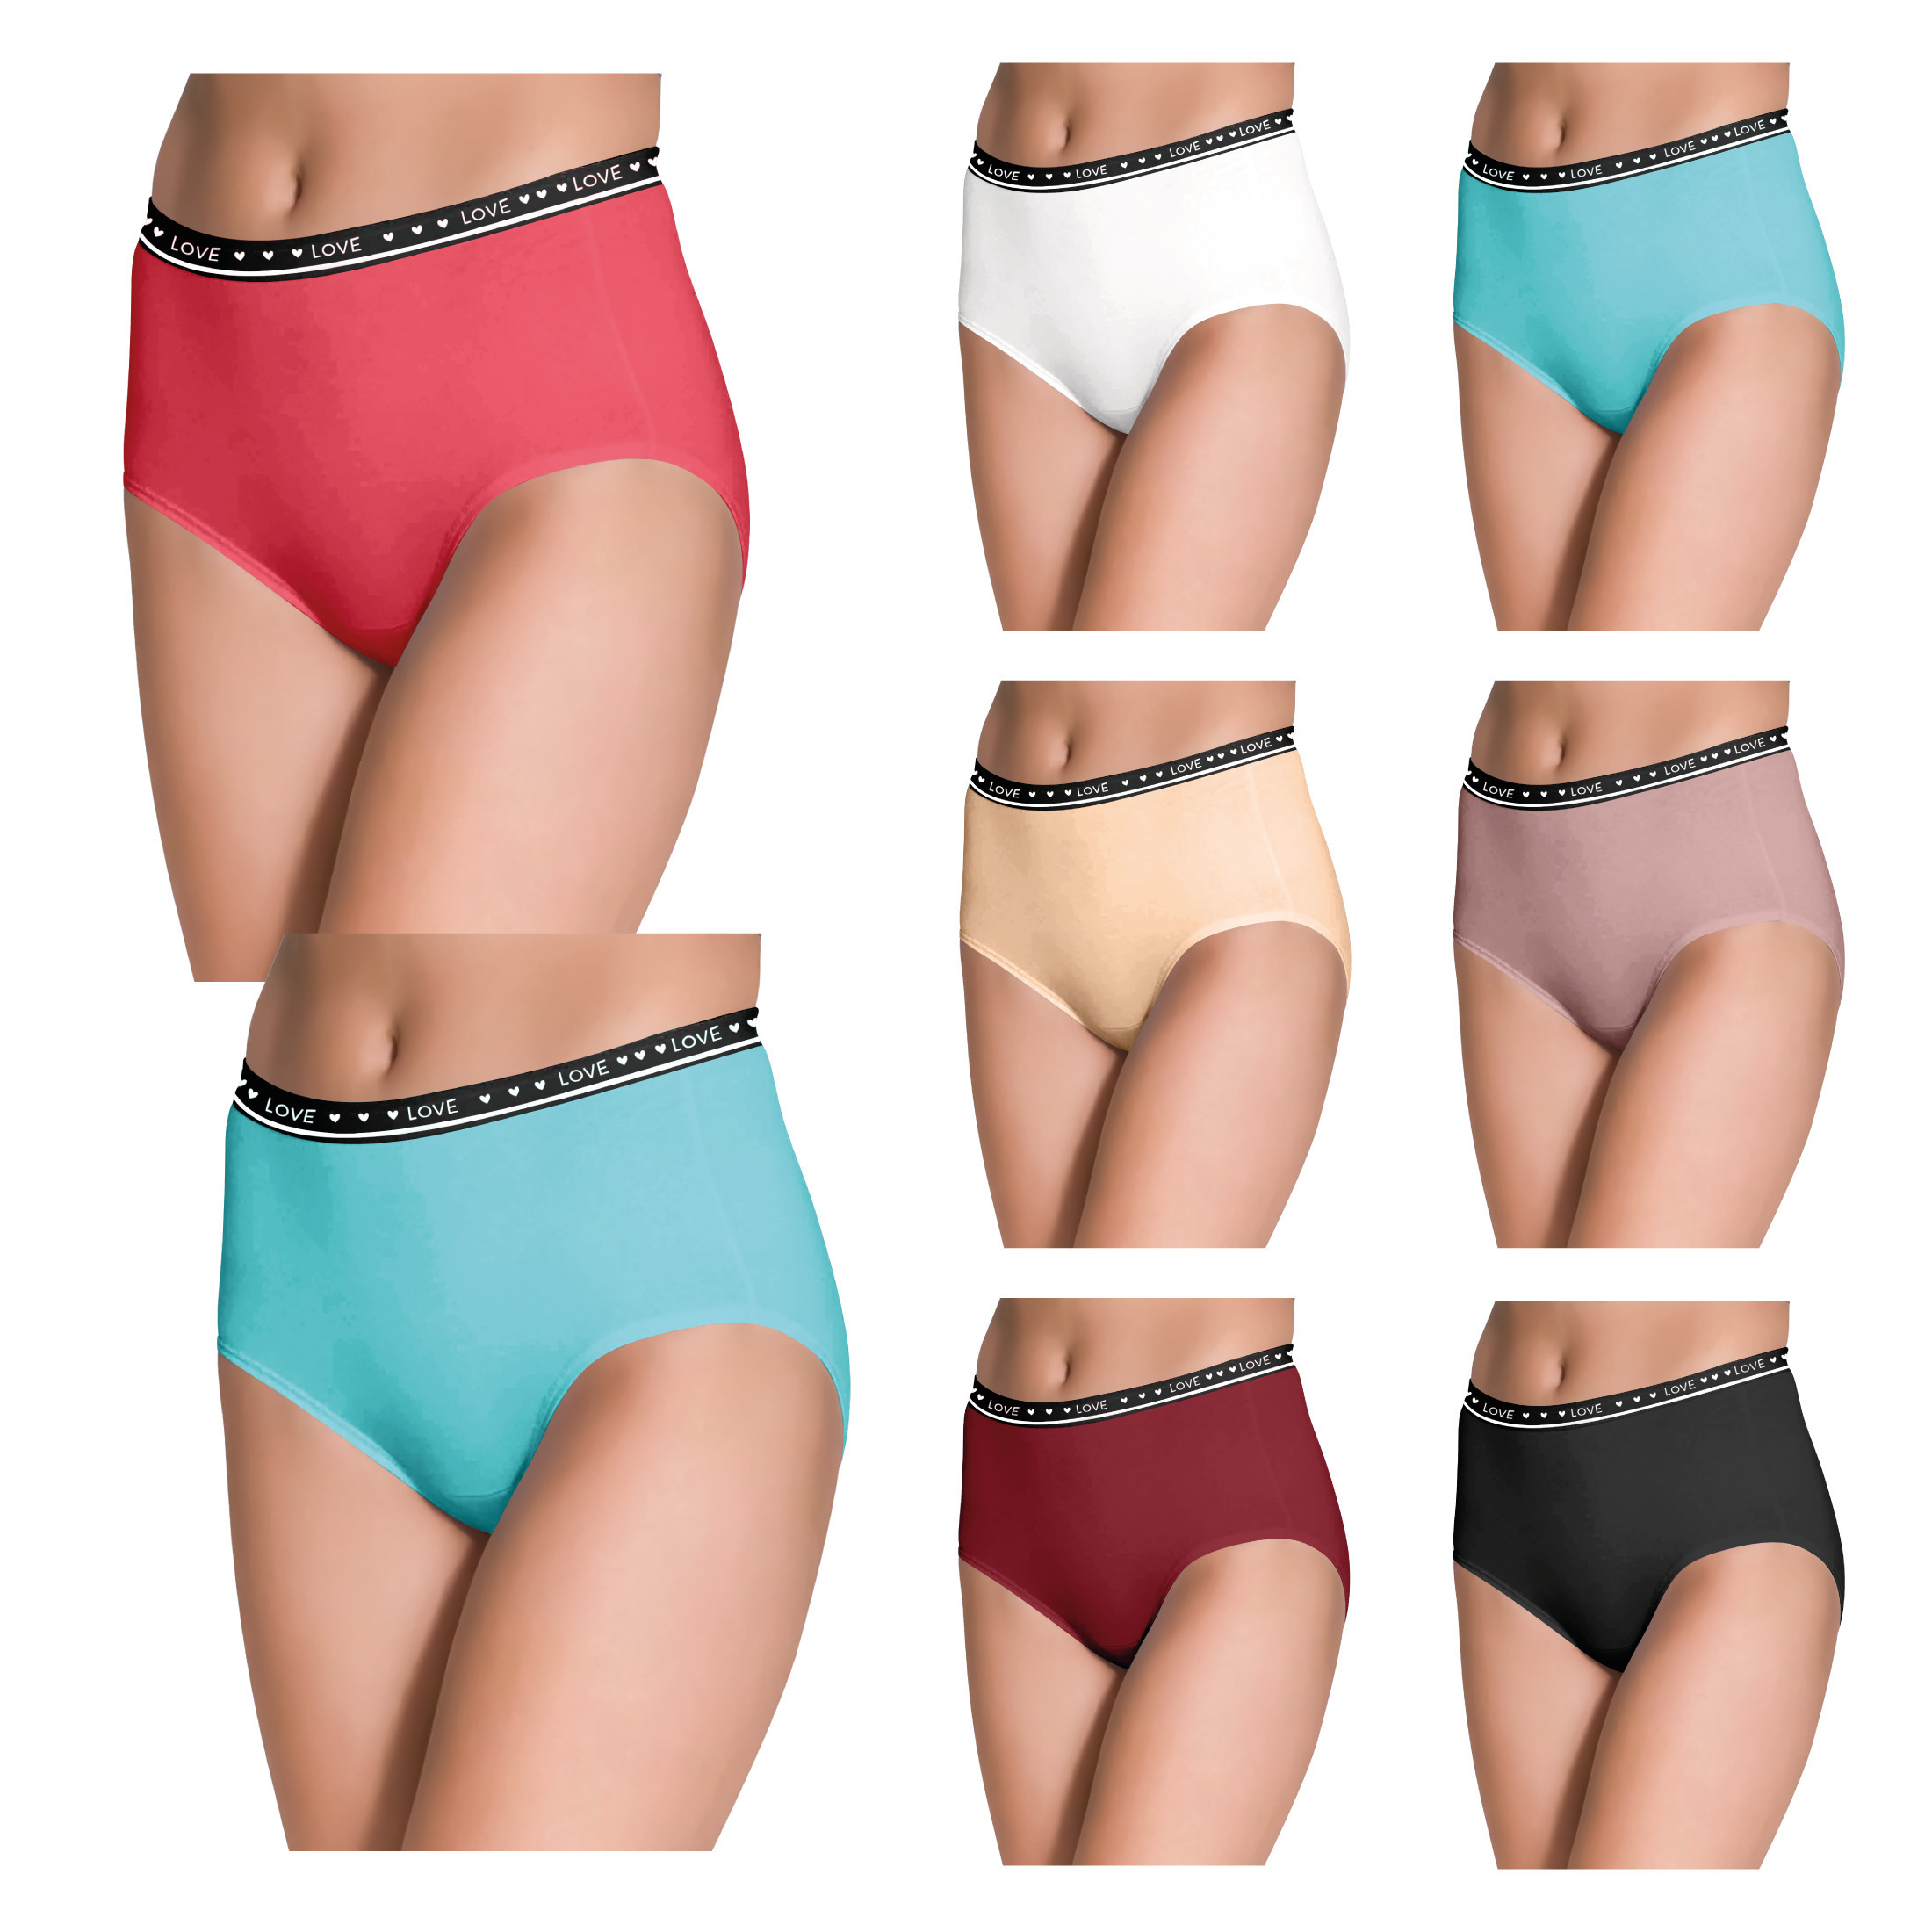 6-Pack: Women's Ultra Soft Moisture Wicking Panties Cotton Perfect Fit Underwear (Plus Sizes Available ) - Medium